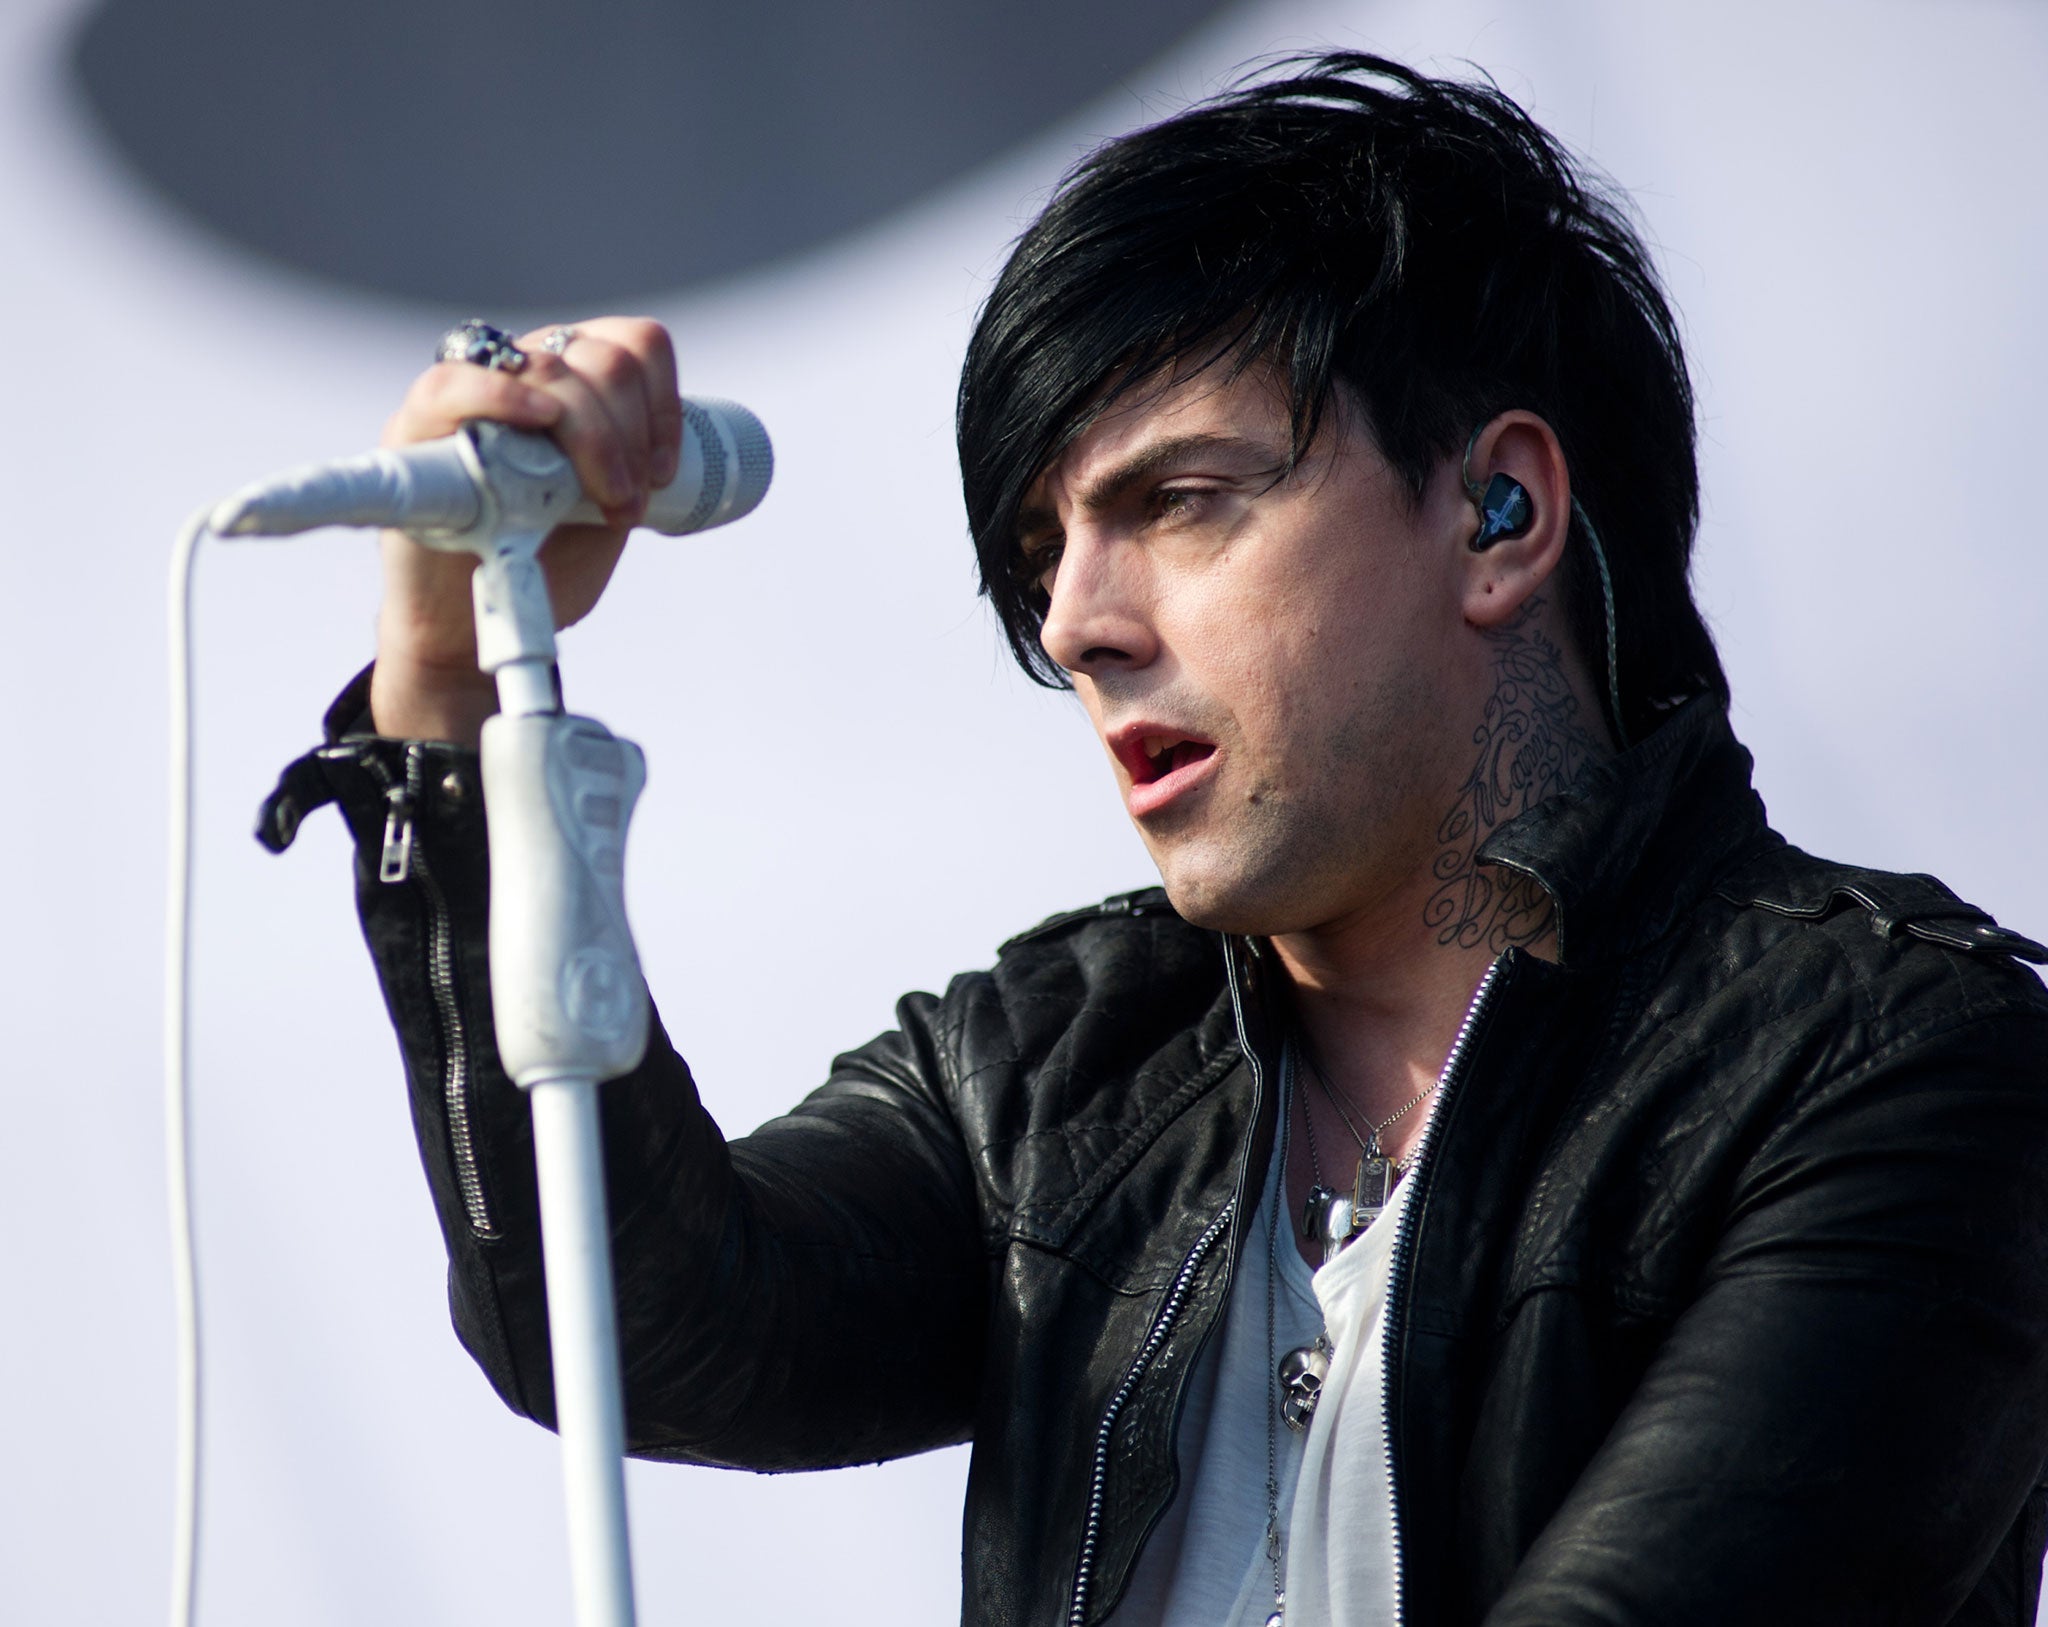 Ian Watkins performs at V Festival in 2011